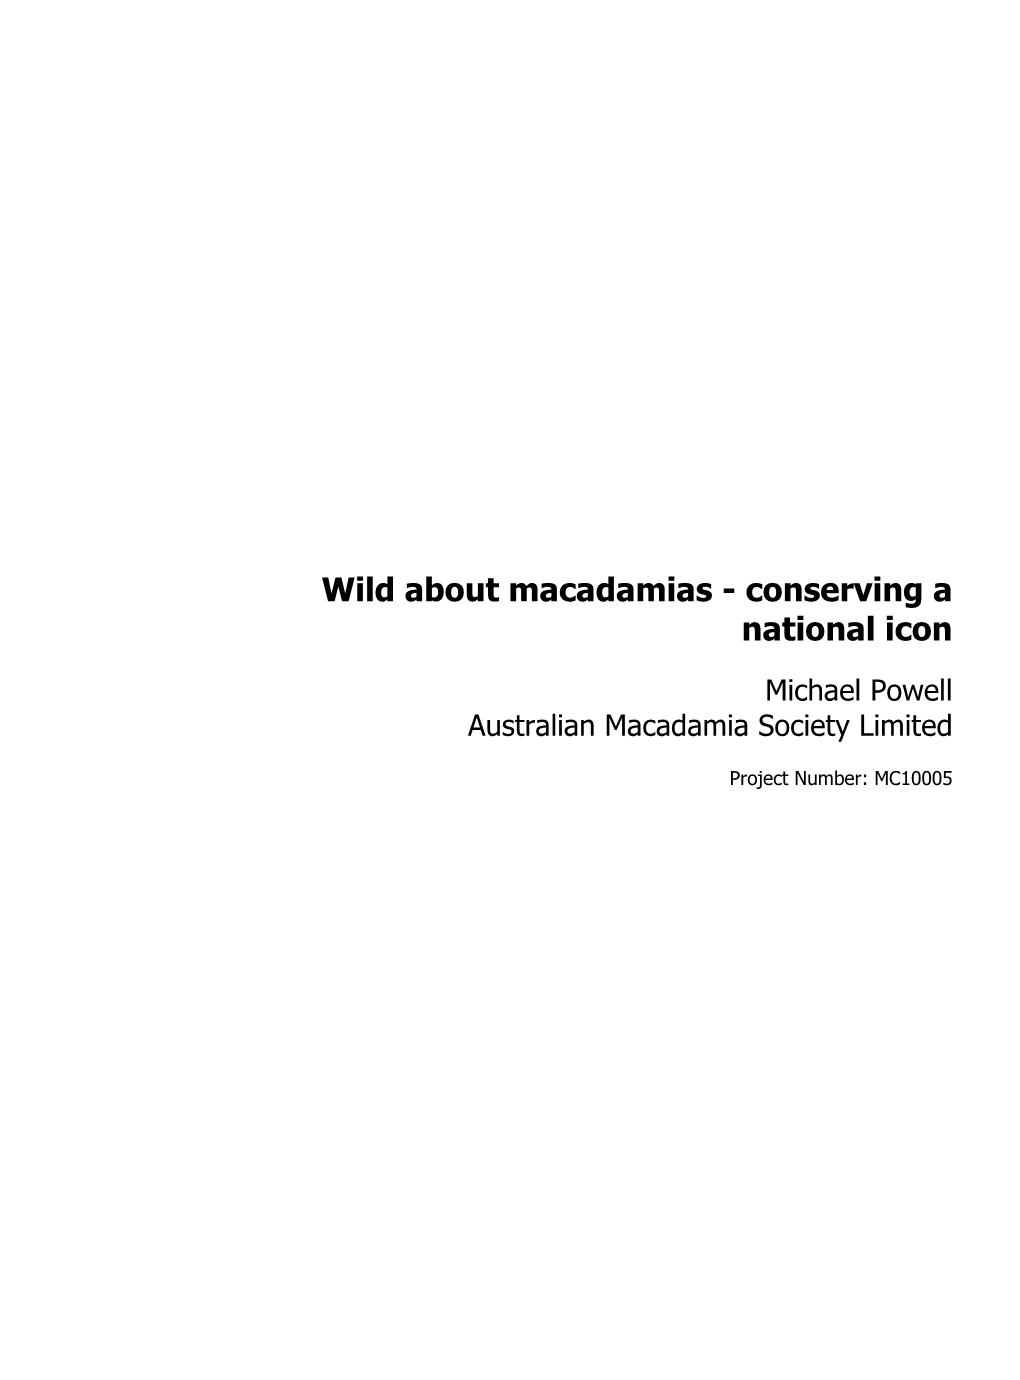 Wild About Macadamias - Conserving a National Icon